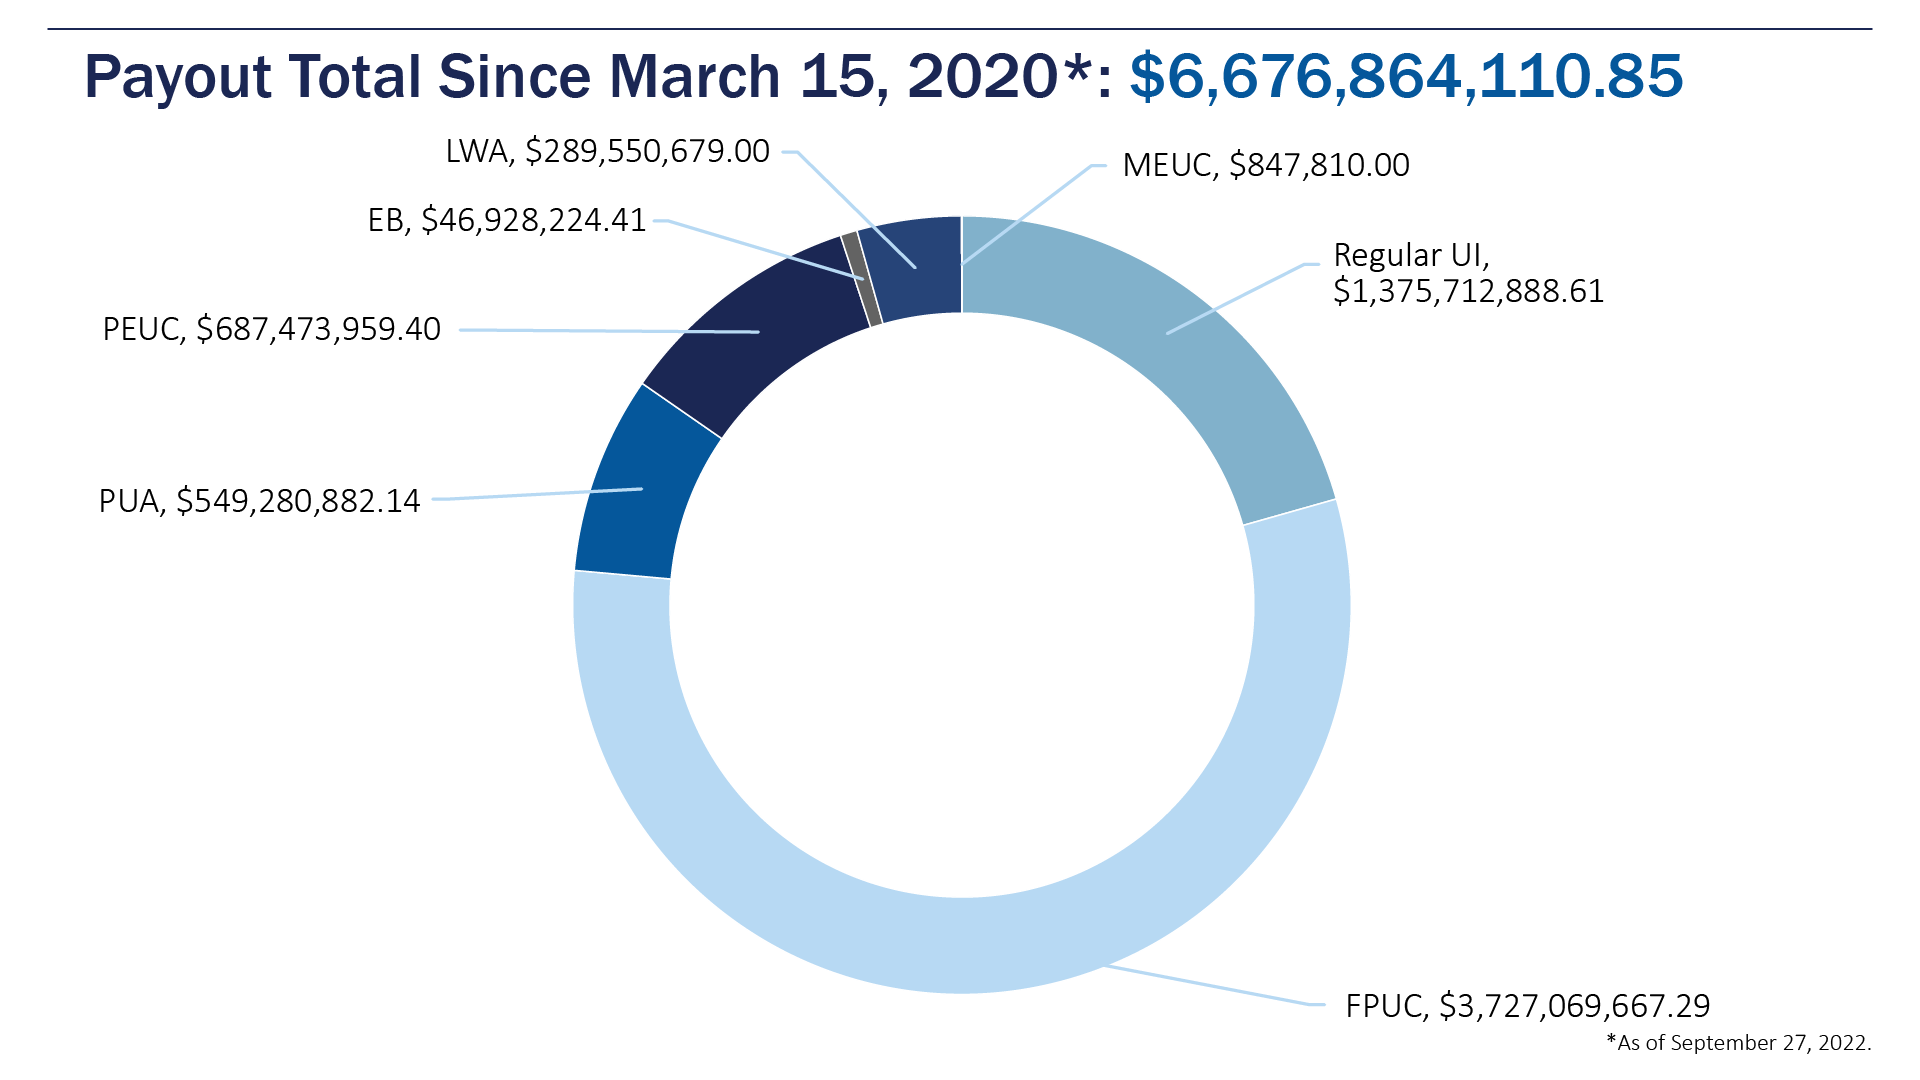 Total Payout since March 2020